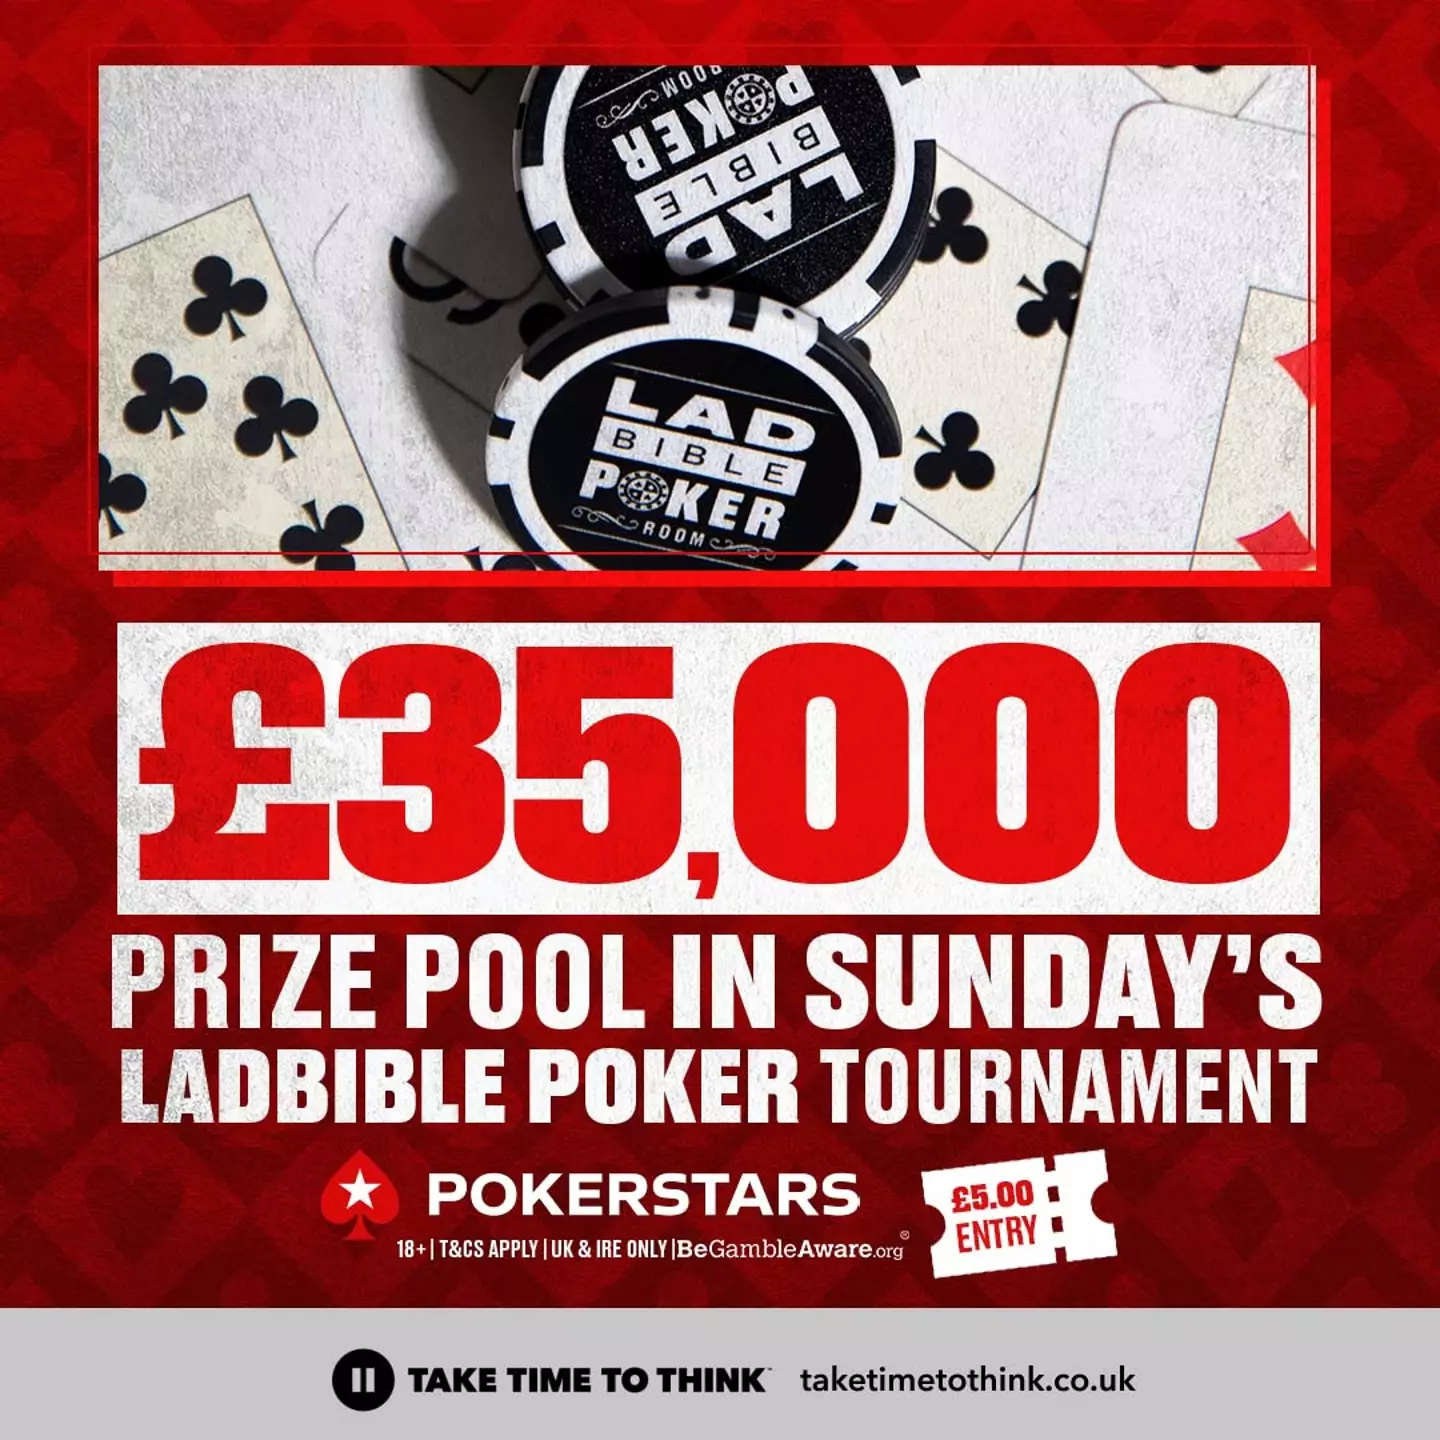 £35,000 In The Prize Pool On Top Of Trip To Las Vegas